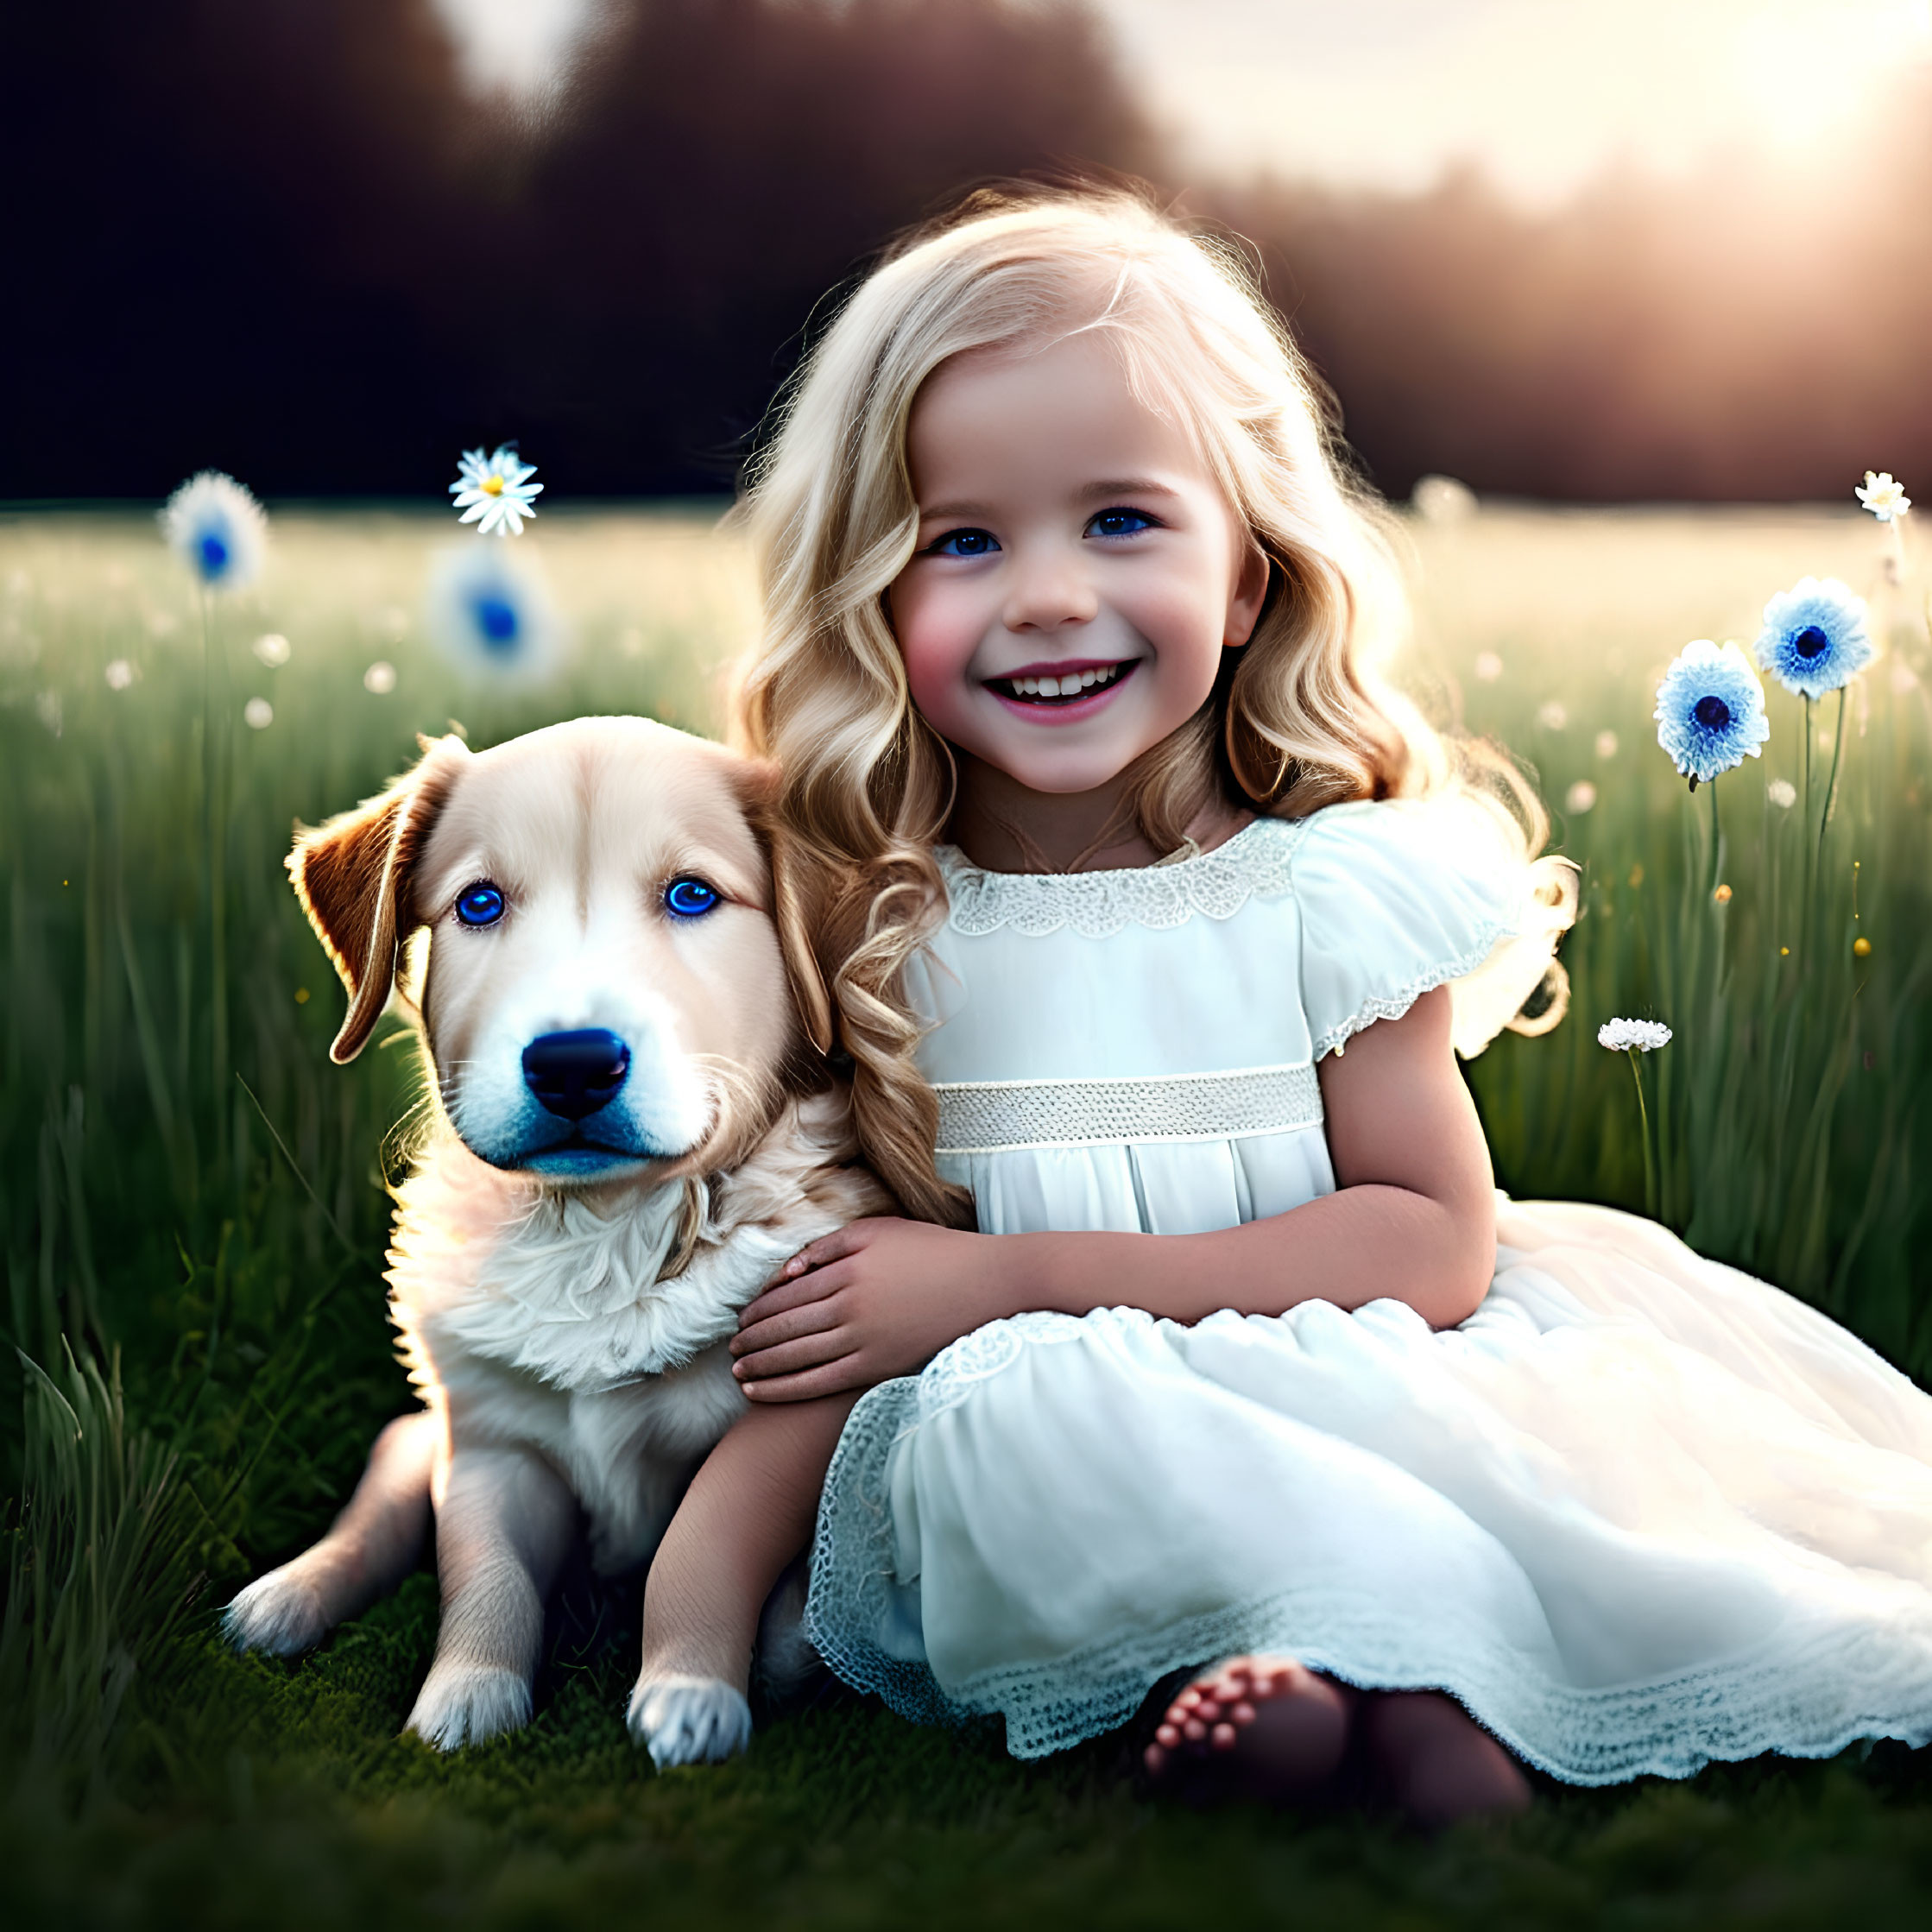 Smiling girl in white dress with puppy in grassy field at golden hour